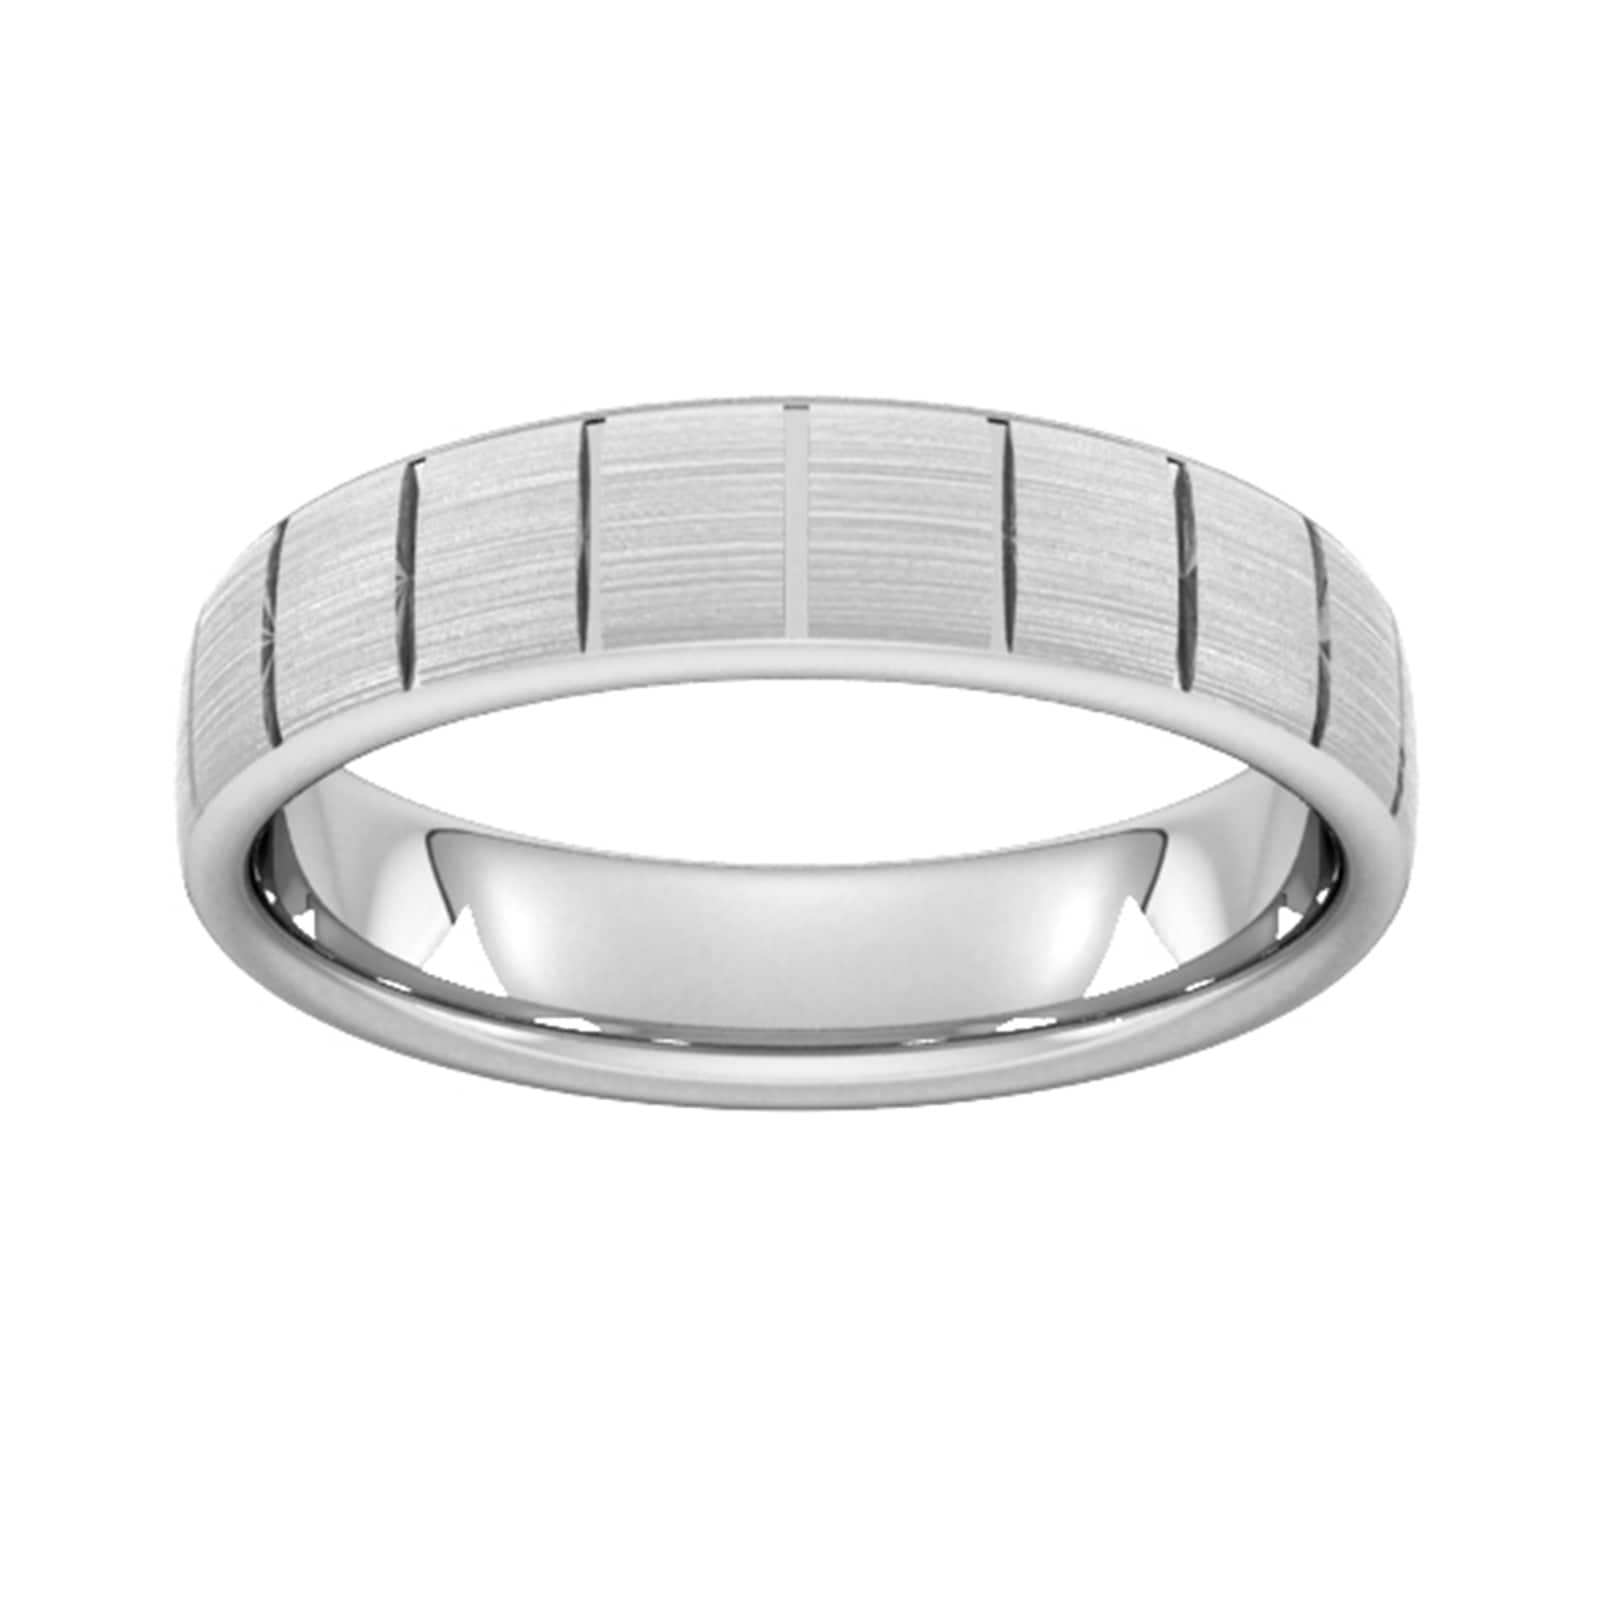 4mm D Shape Standard Vertical Lines Wedding Ring In 18 Carat White Gold - Ring Size O